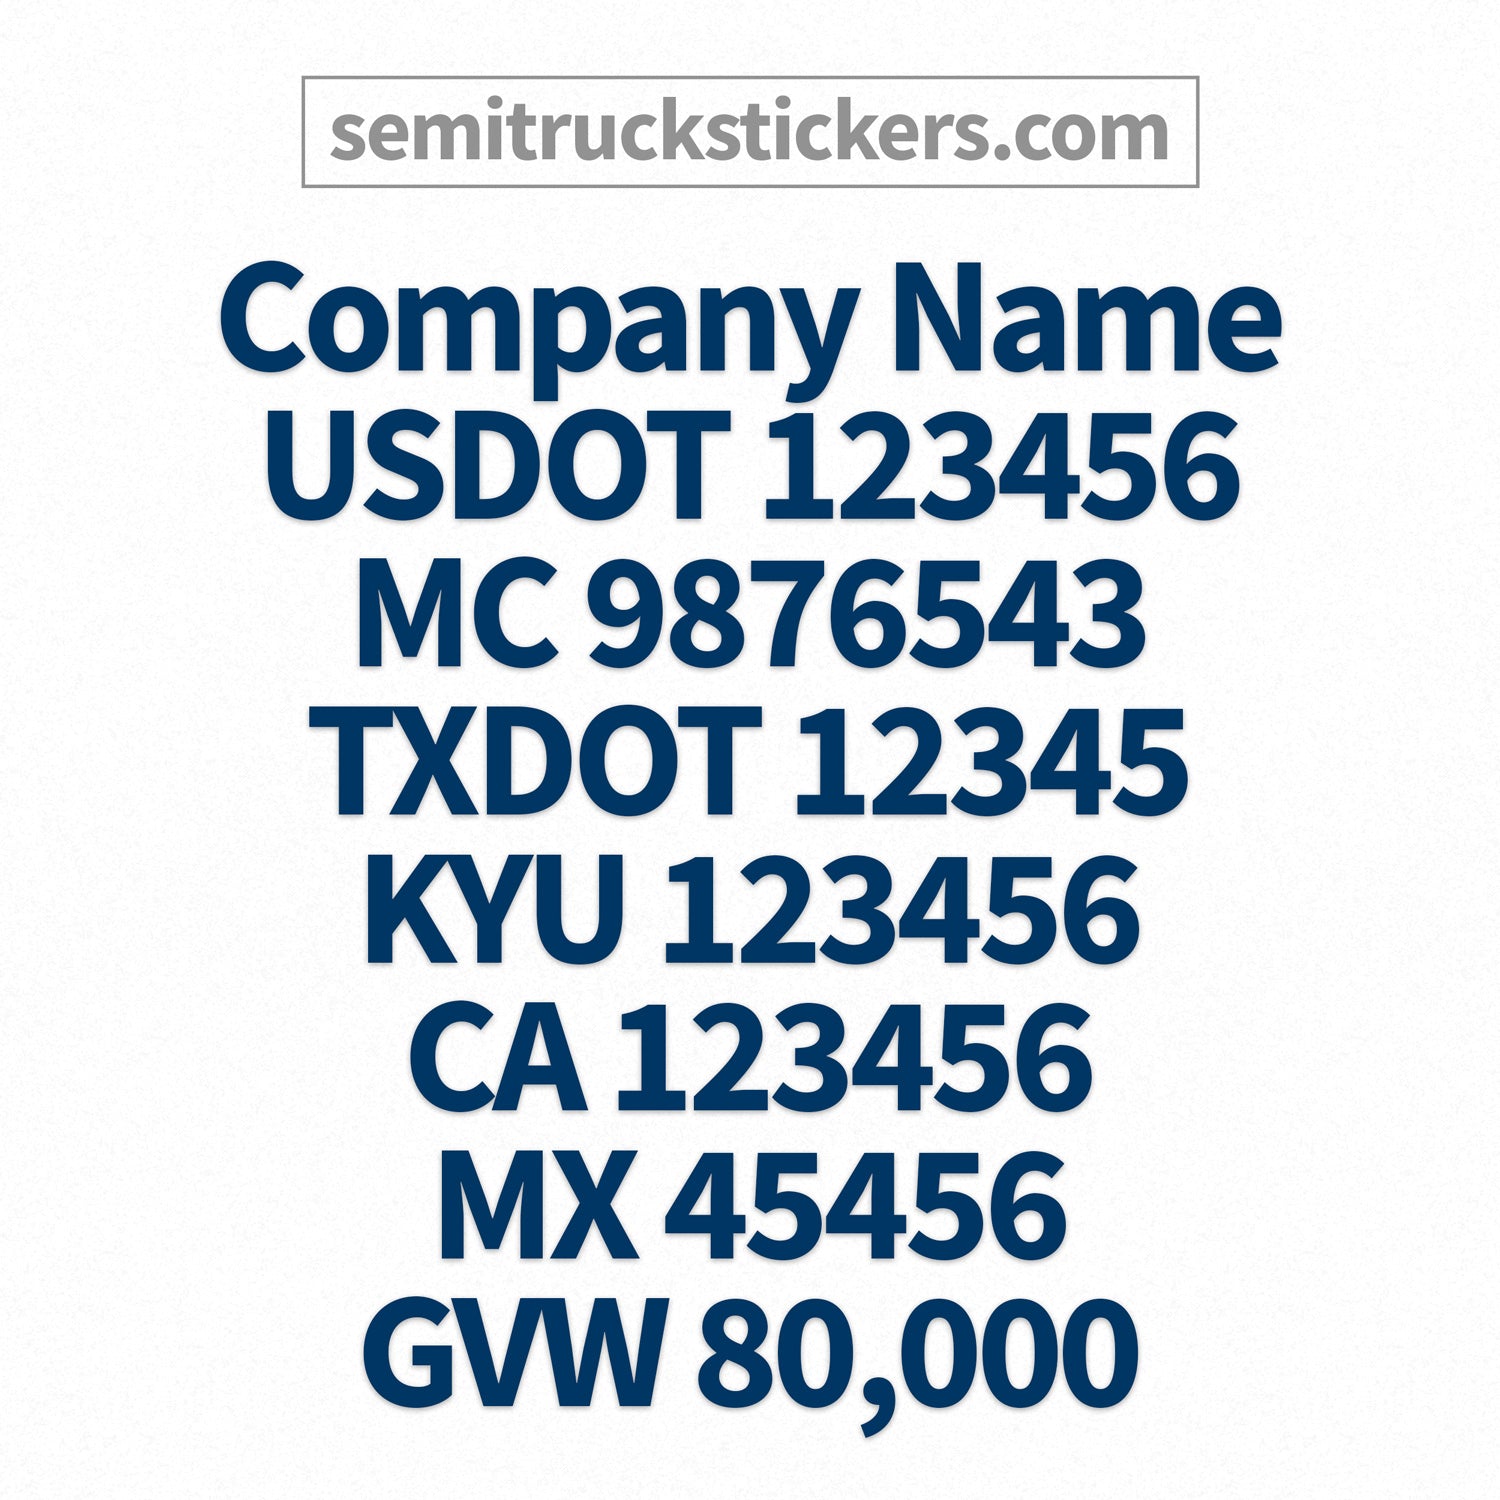 8 lines of text company name decal for semi trucks